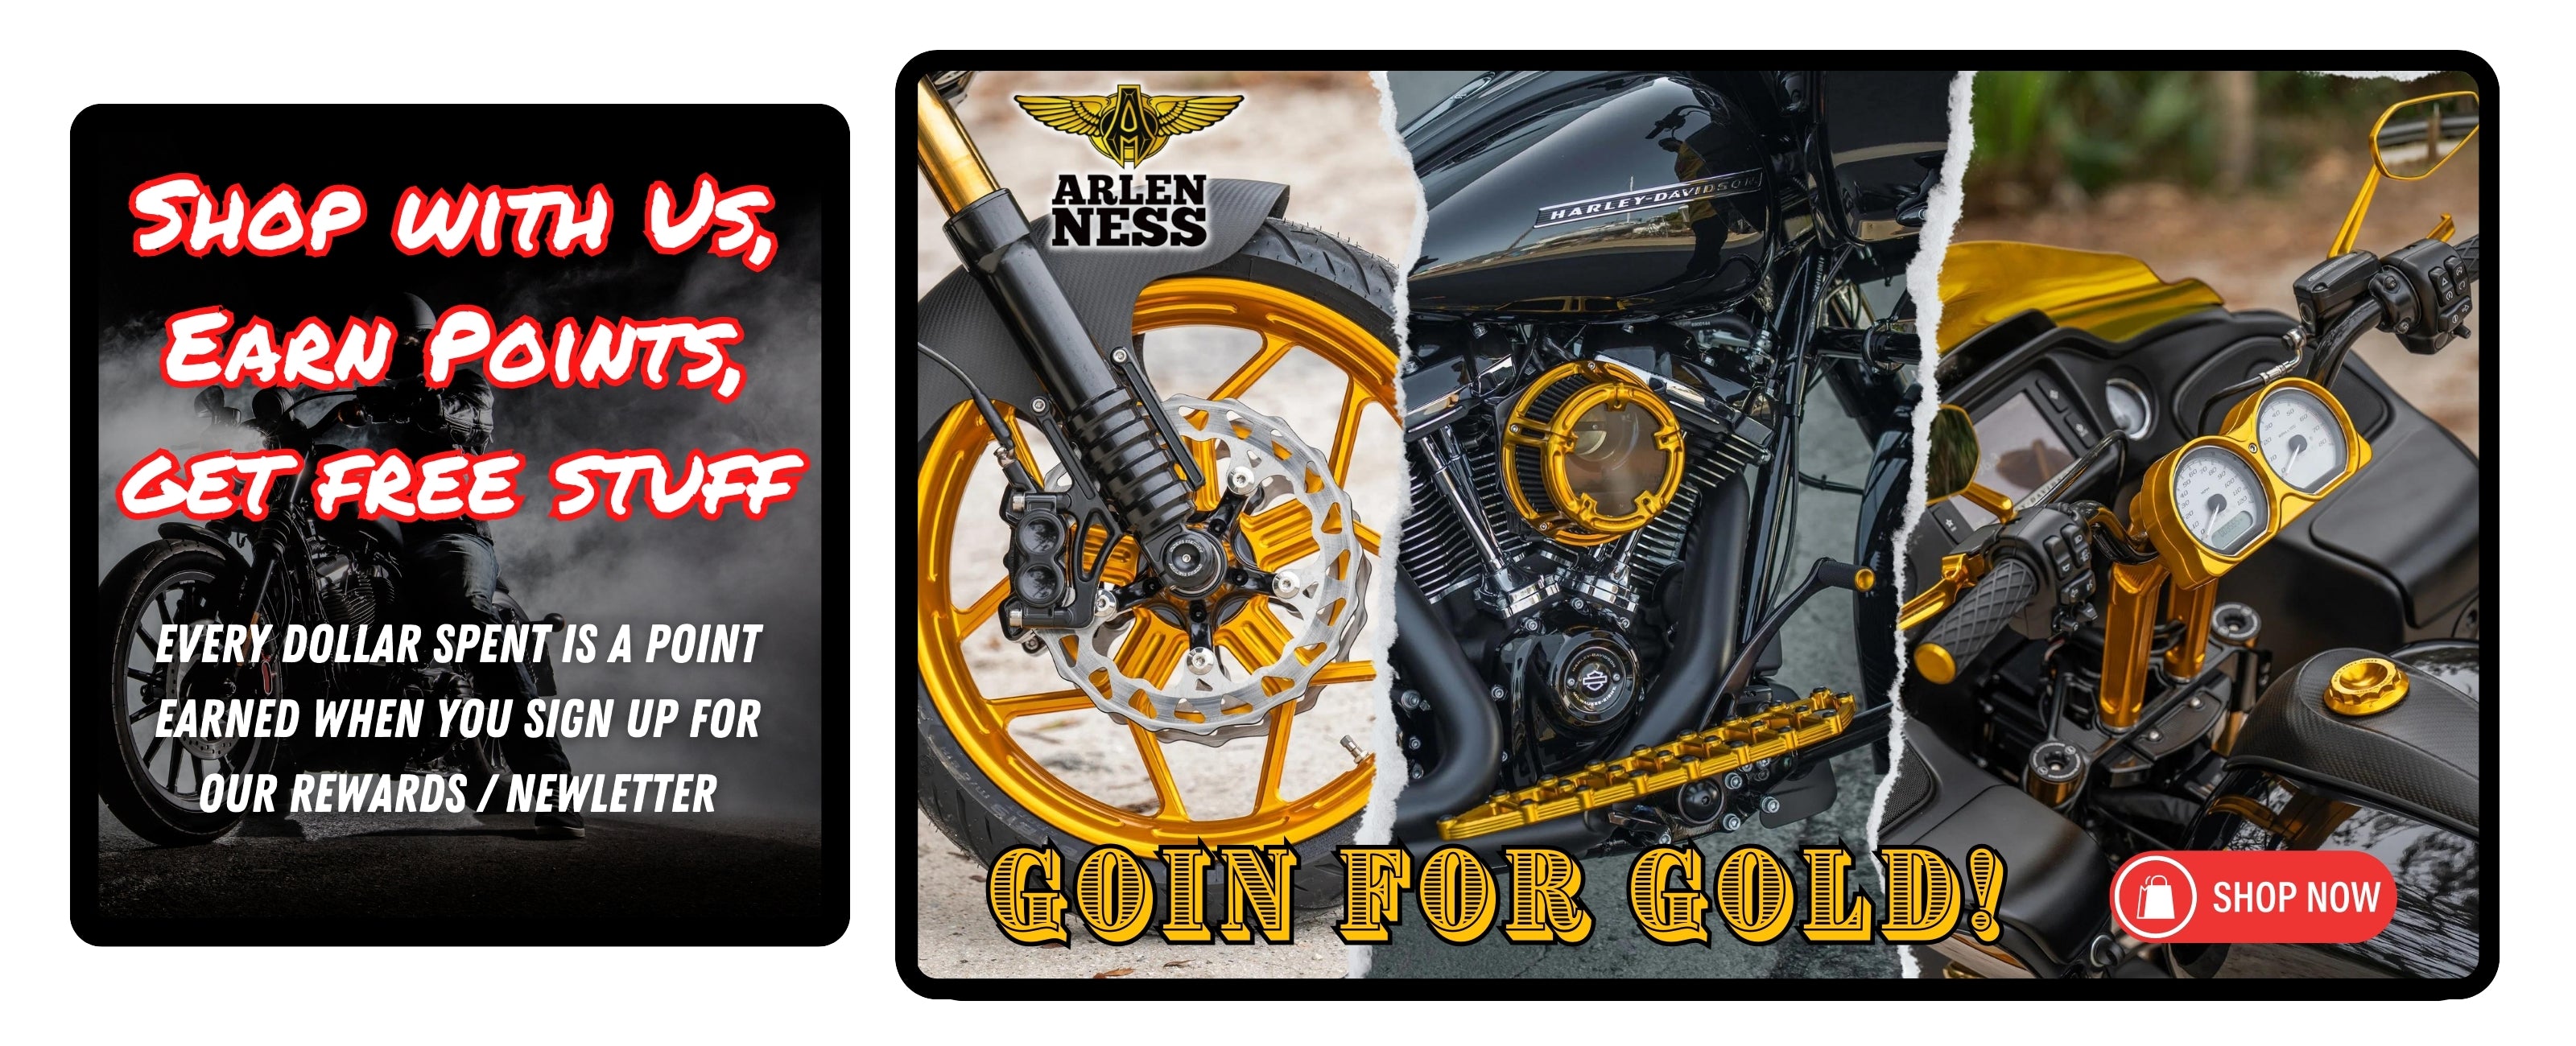 Arlen Ness promotional banner displaying gold wheels, an air cleaner, and Method gold risers with gauge mount. Includes a "Shop Now" button and a note about the Arlen Ness rewards system